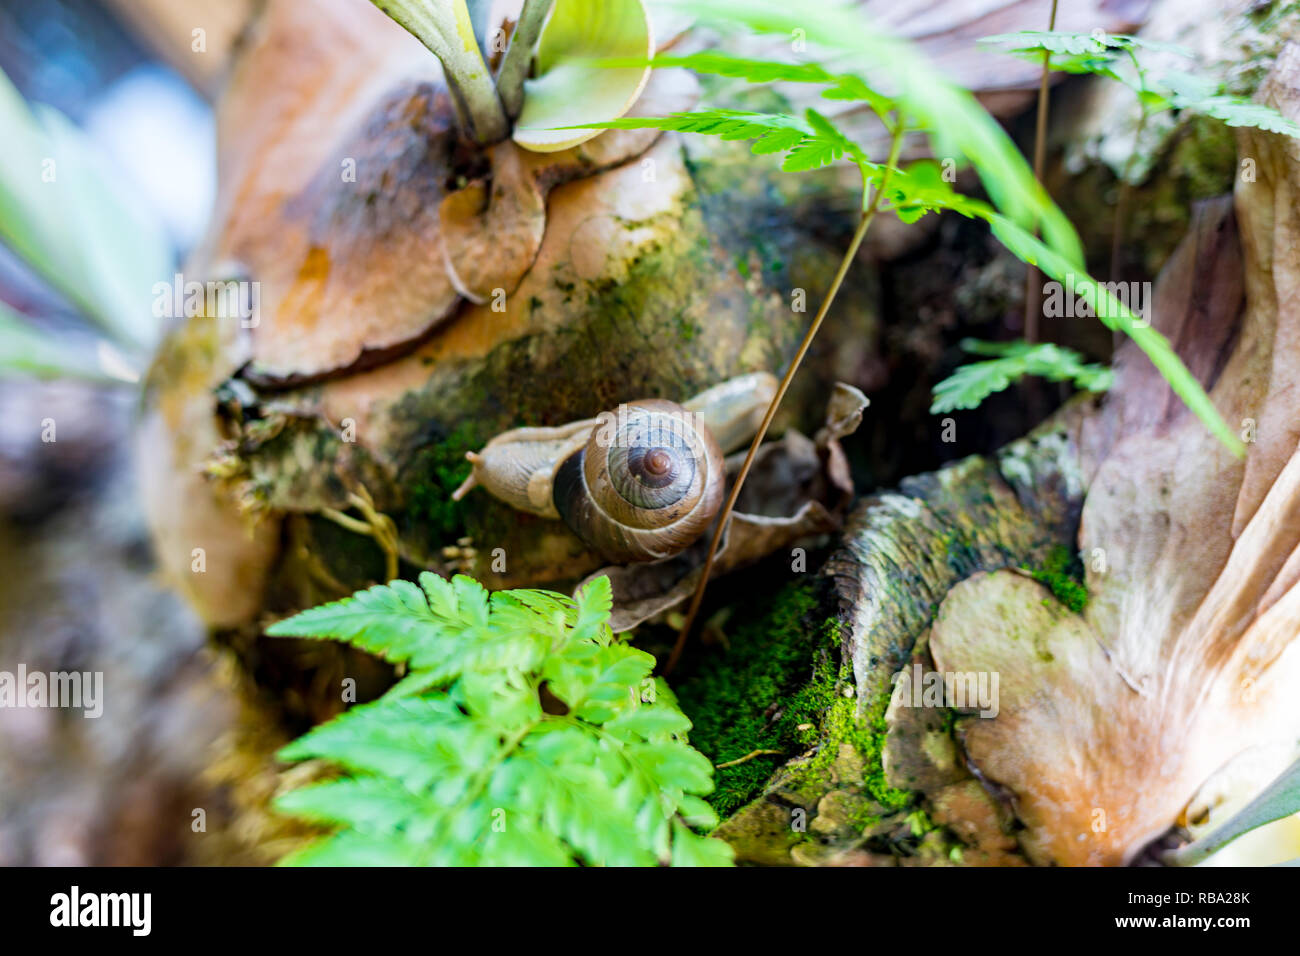 Big snail in shell crawling on road, summer day in garden Stock Photo